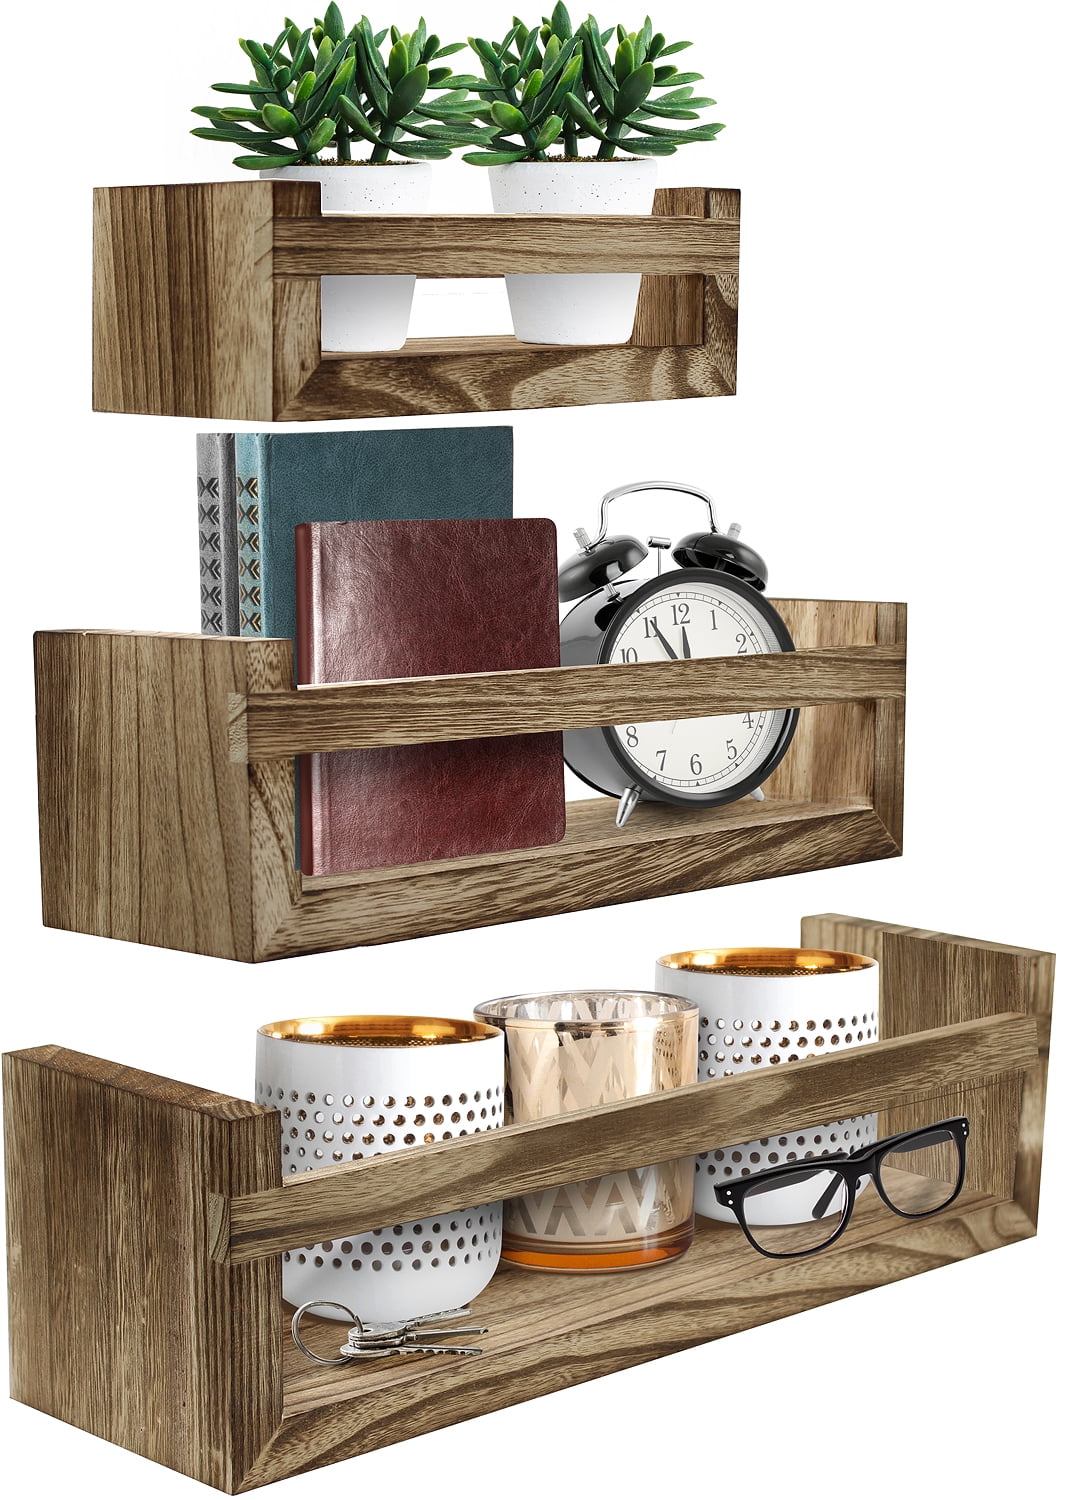 Details about   2-Tier Floating Shelves Wall Mounted Rustic Wall Storage Decorative for Bedroom 